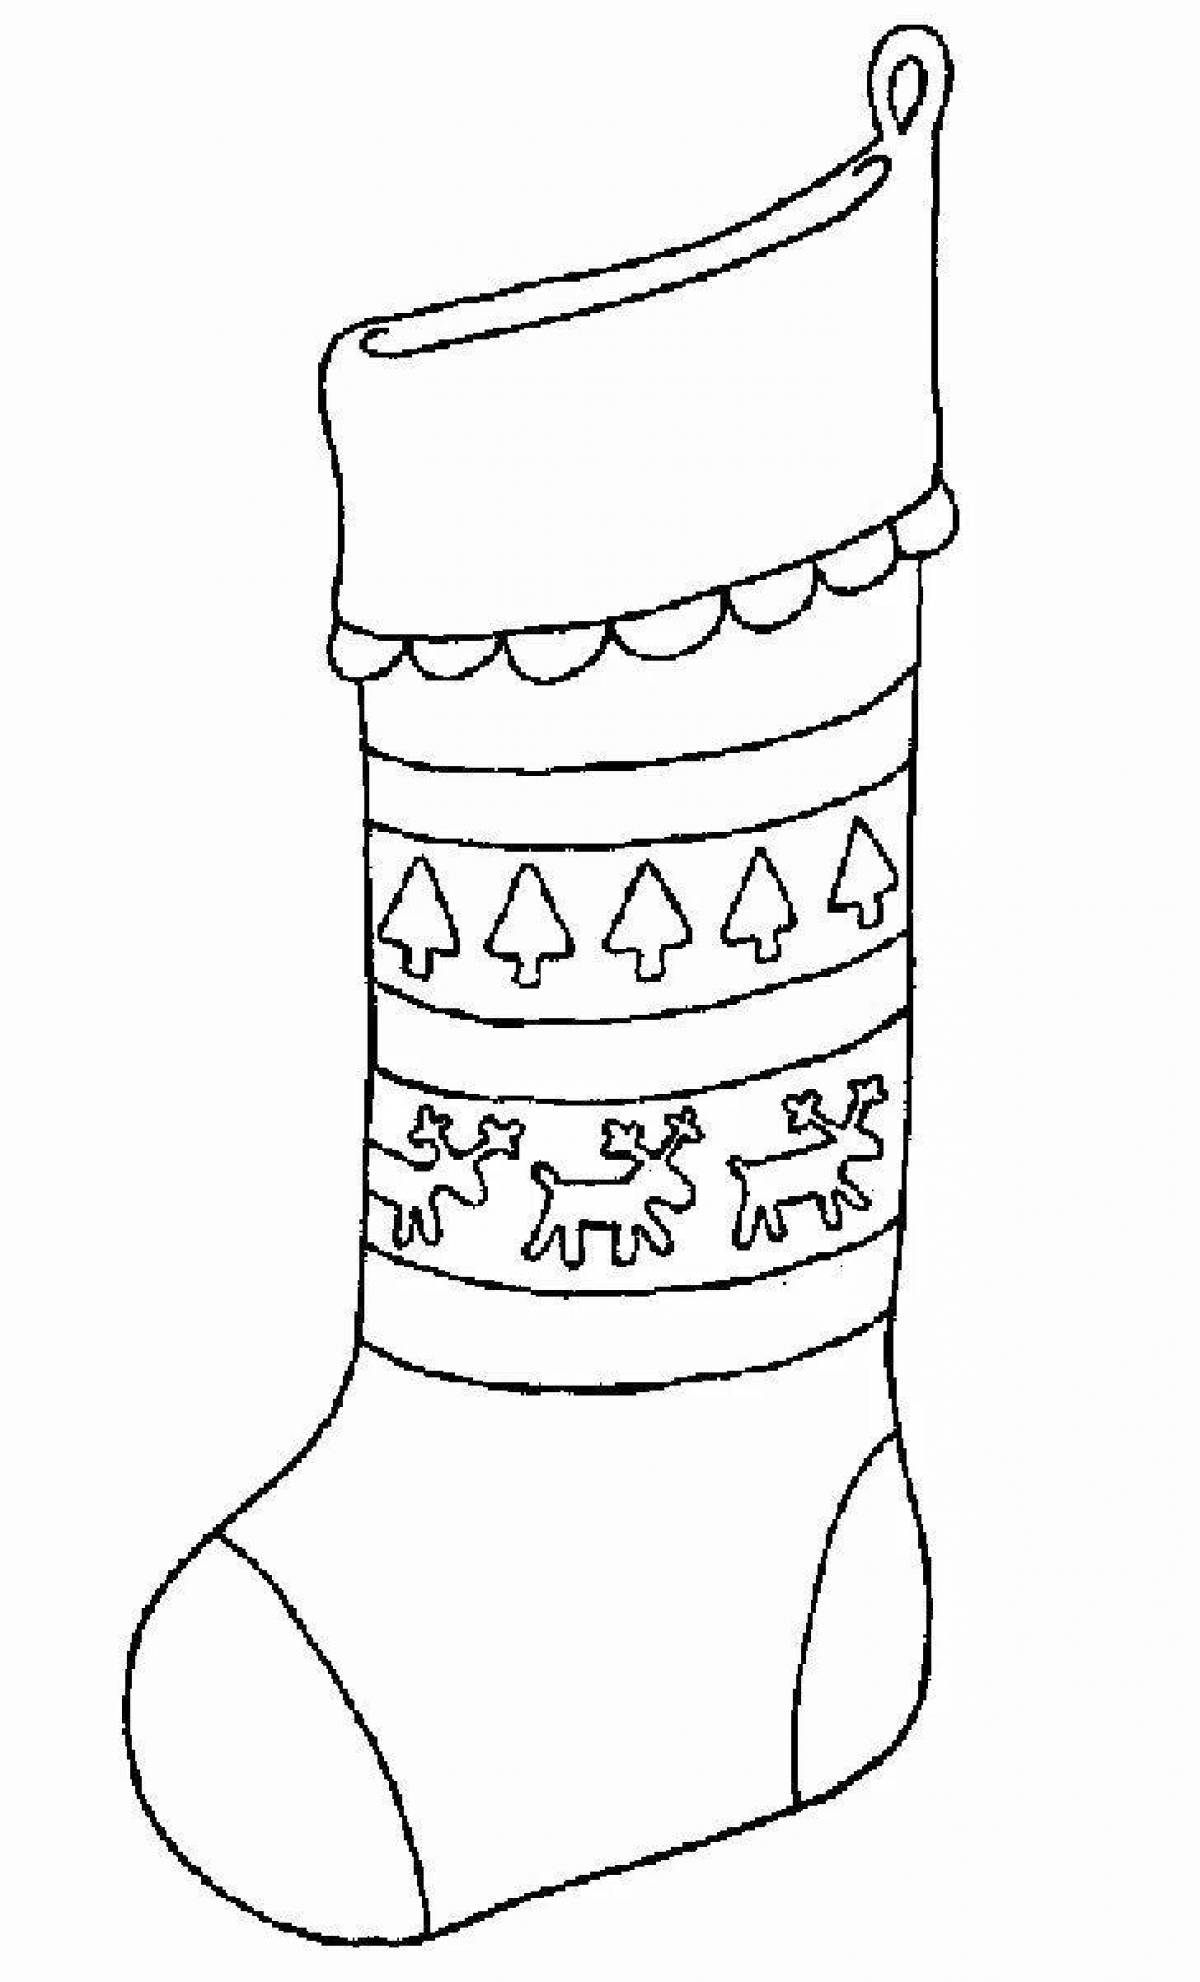 Adorable stocking coloring page